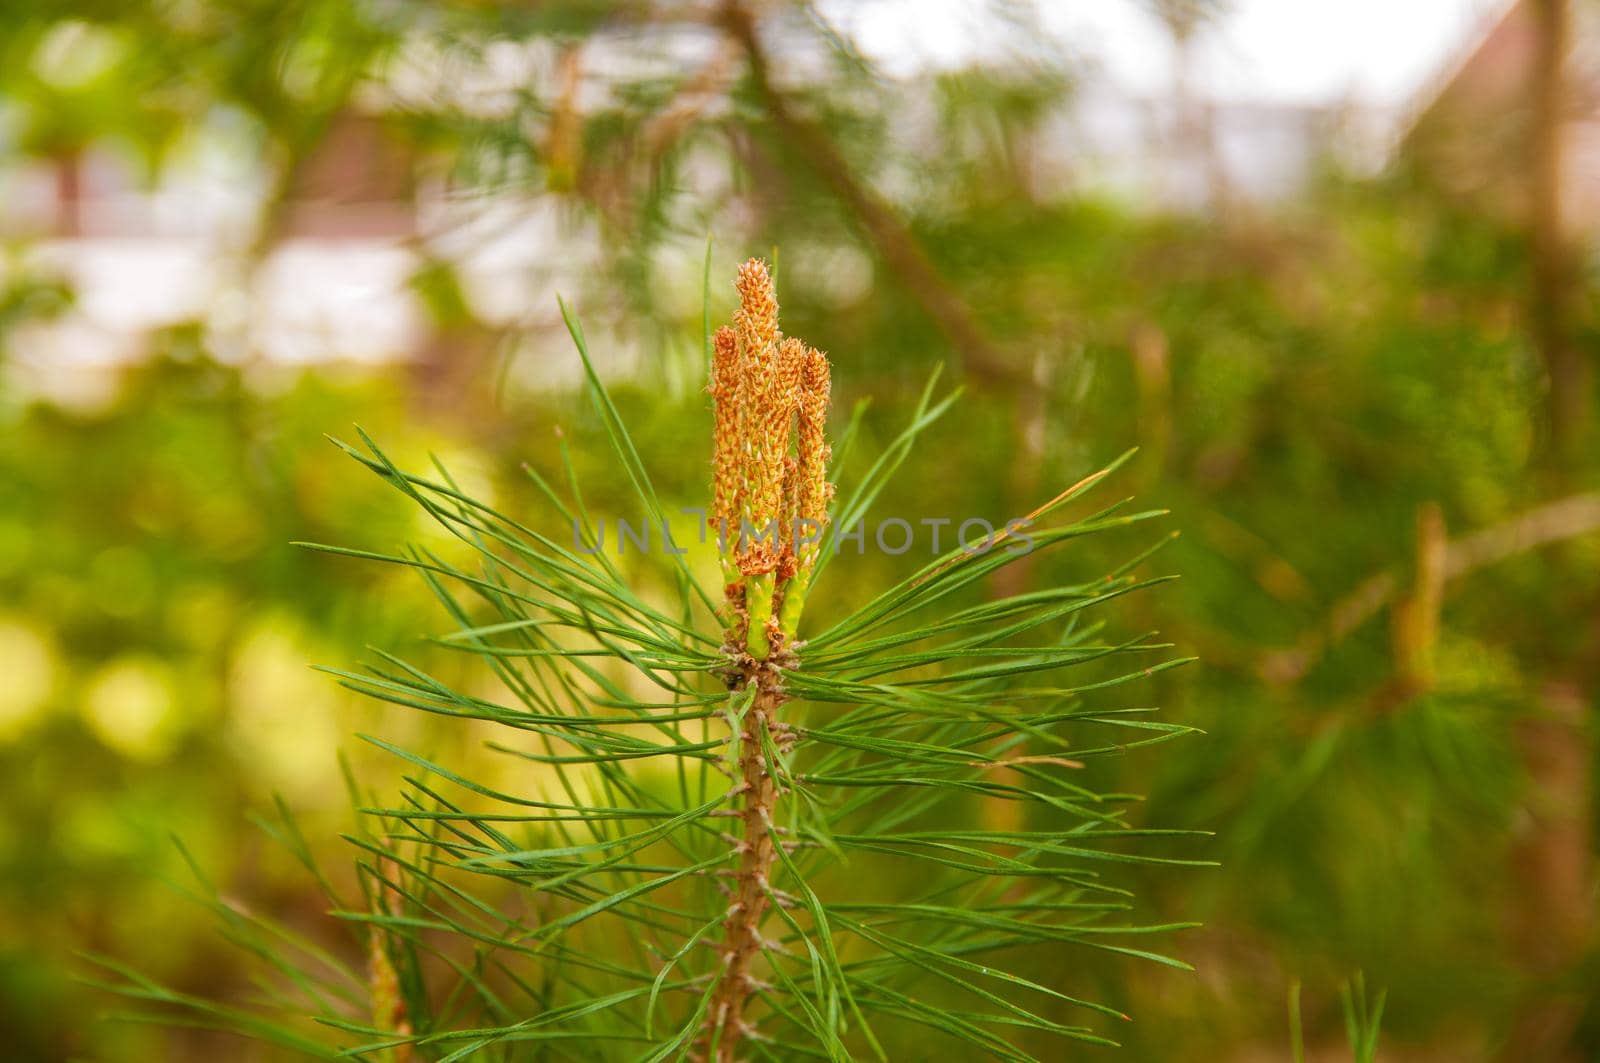 Pine  with  buds on a young pine branch  by ozornina